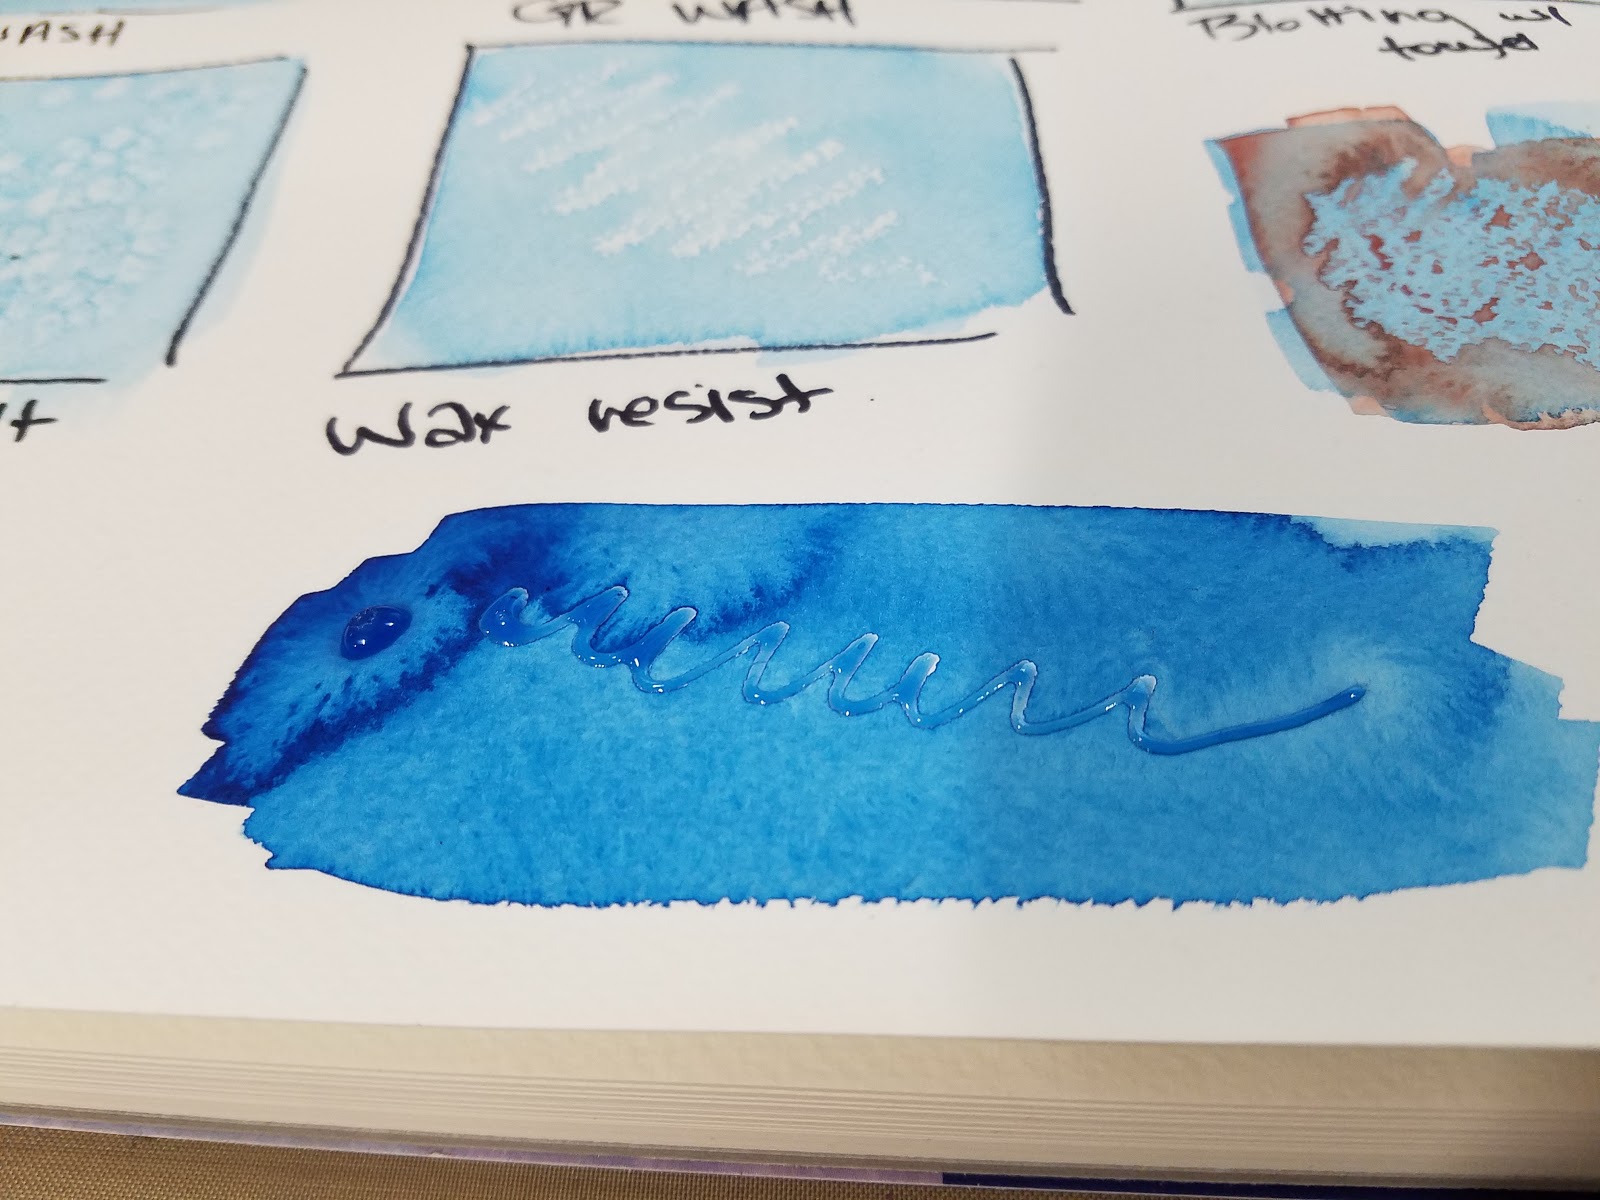 Speedball Watercolour Journal Review - The Artistic Gnome Blog